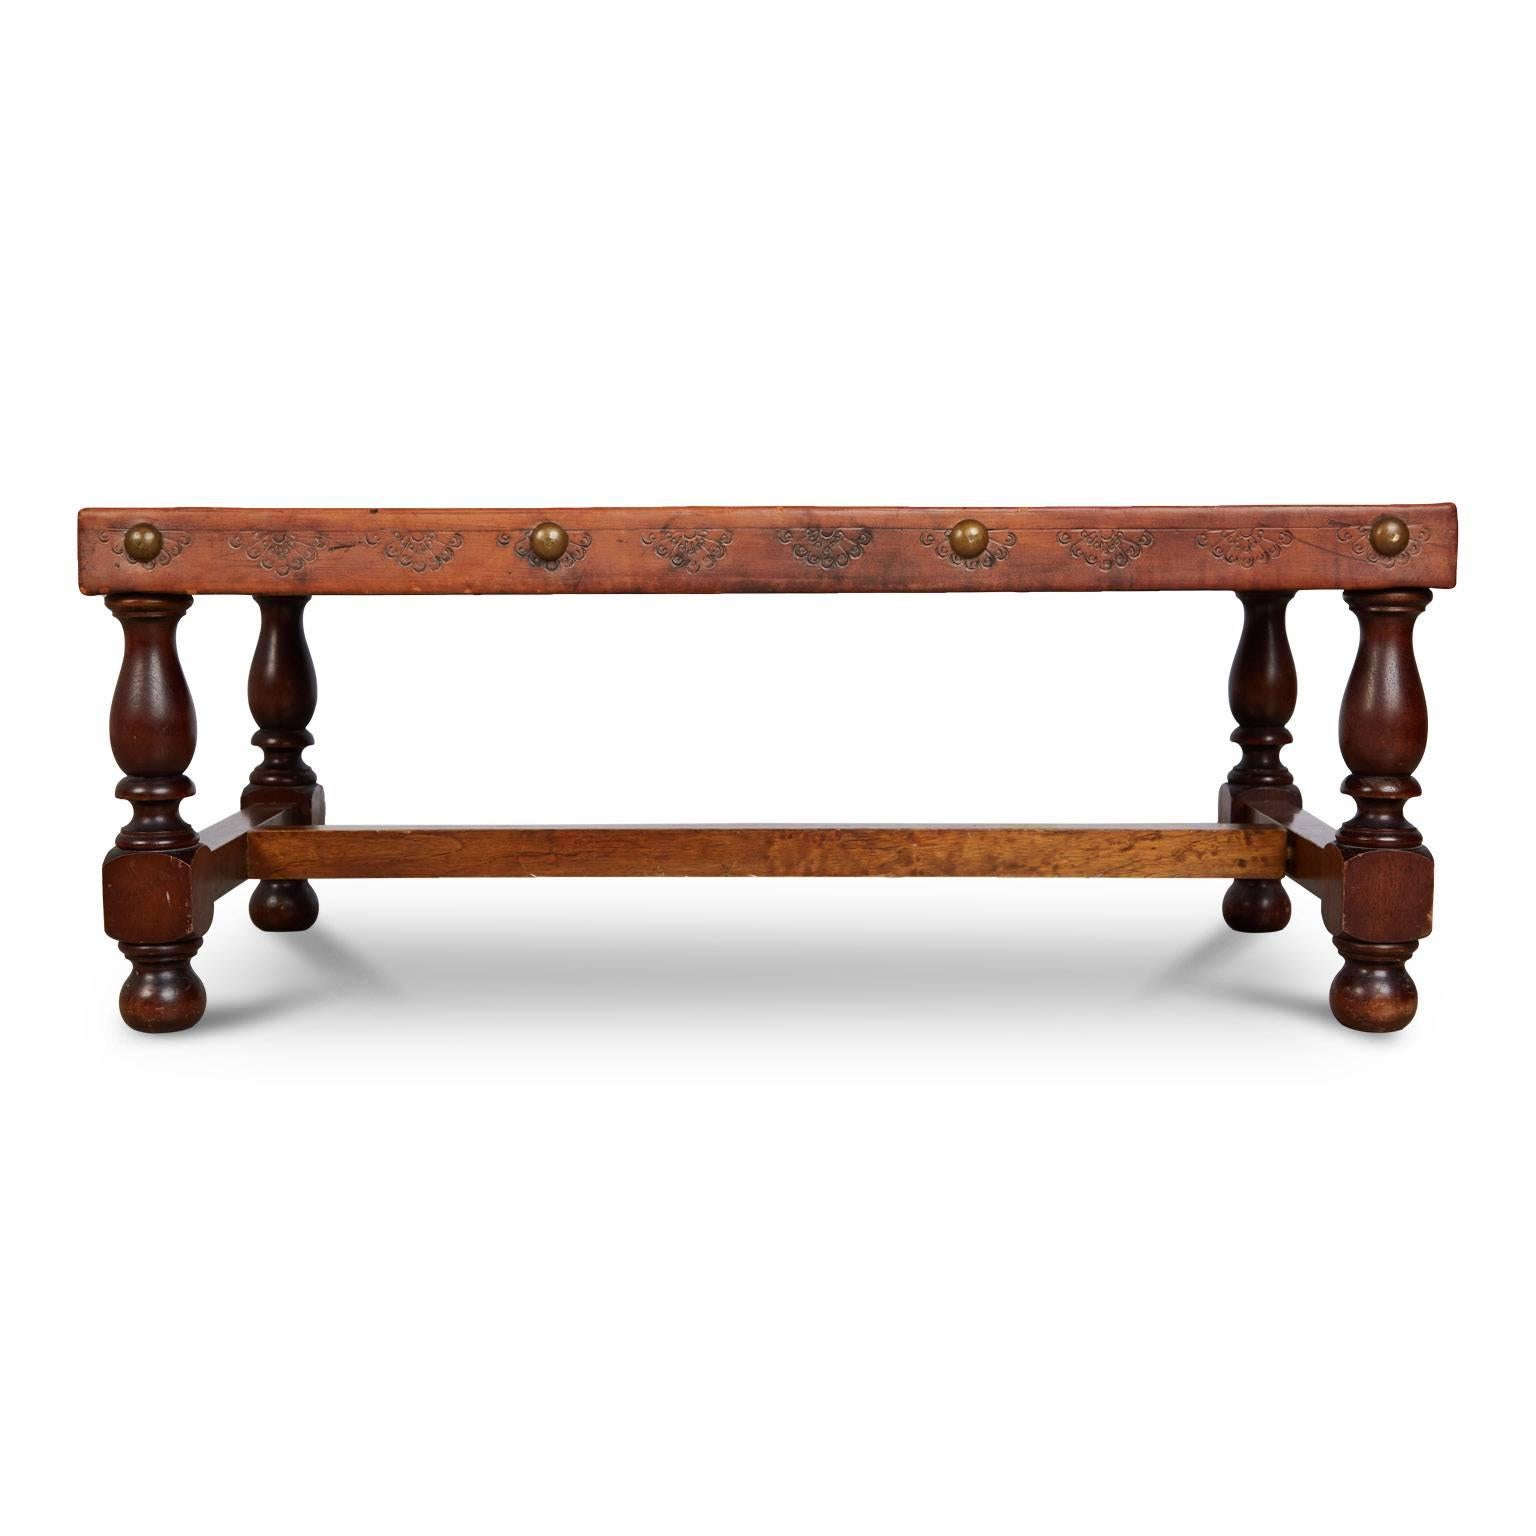 Beautifully hand tooled Peruvian bench or coffee table (you can use for either) depicting a South American pastoral scene. Fabricated from a walnut frame with turned wood legs, the top is wrapped in leather and illustrated with embossed figures on a